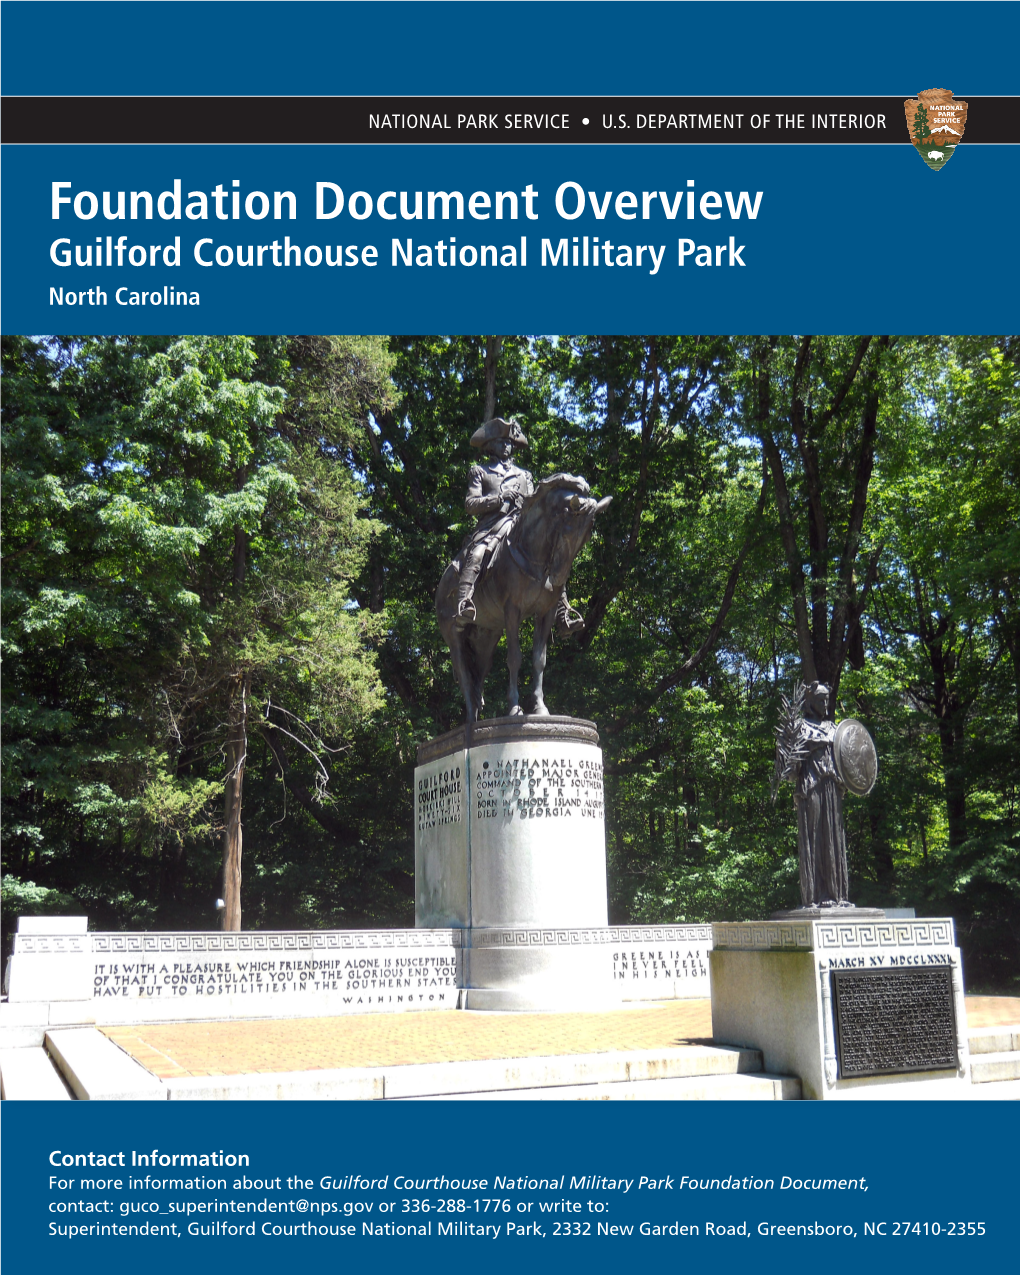 Foundation Document Overview, Guilford Courthouse National